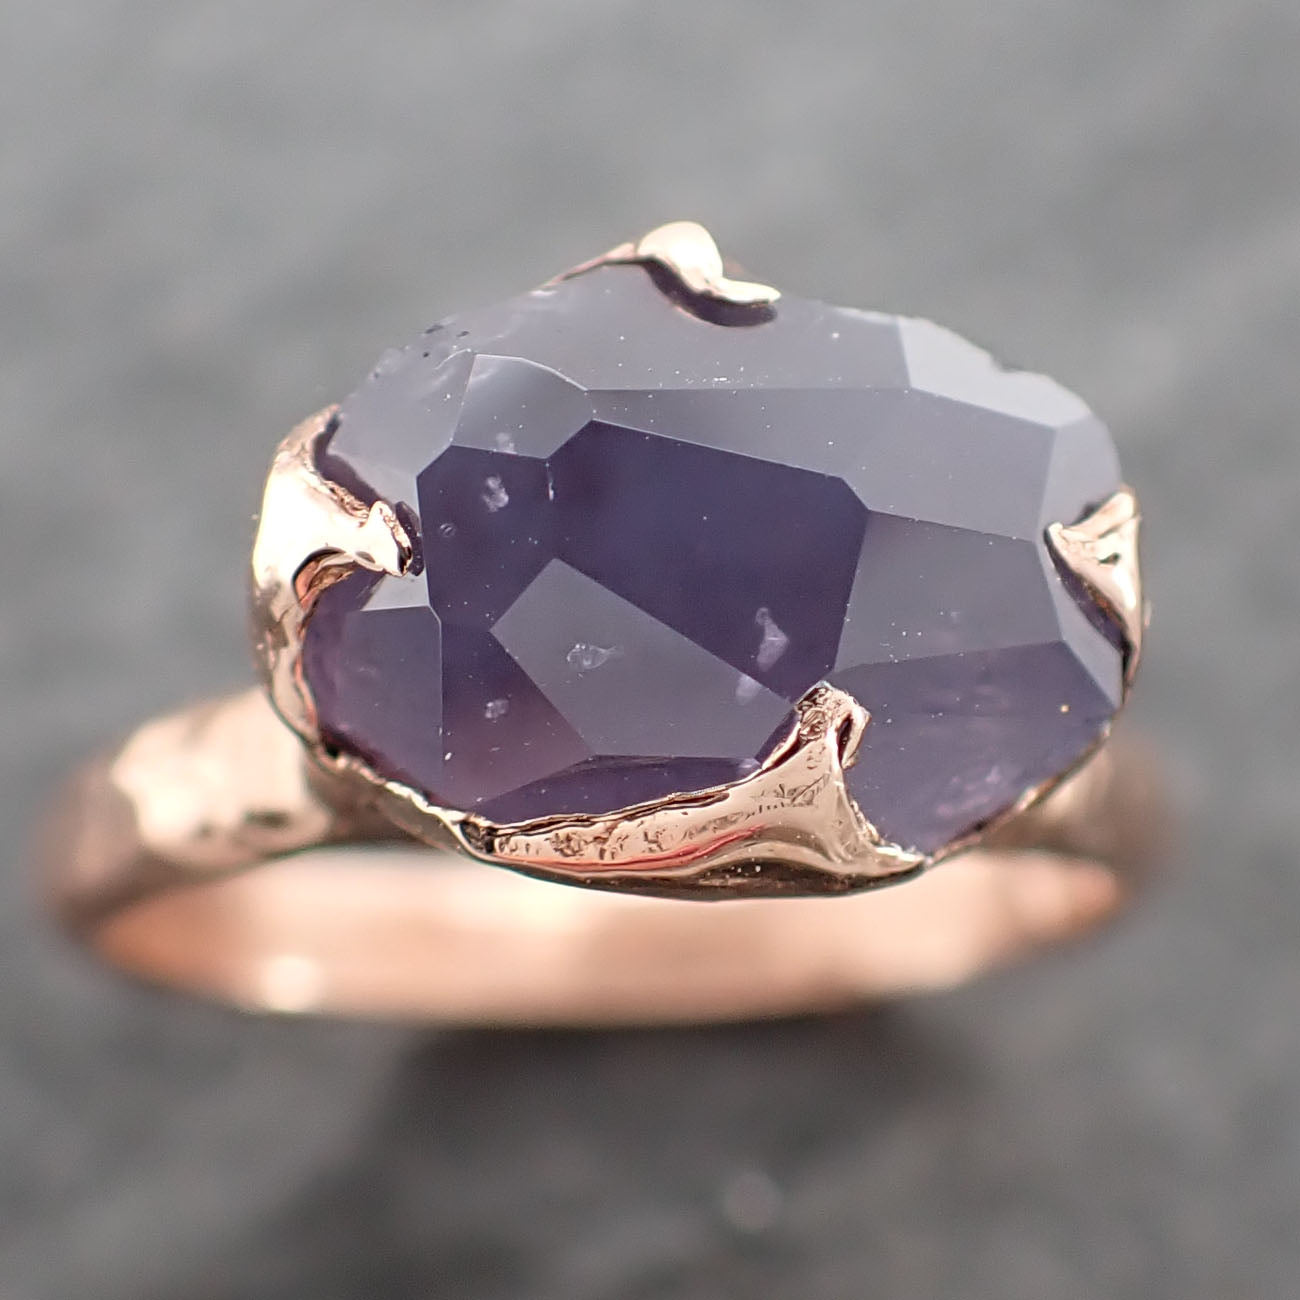 Partially Faceted Sapphire 14k rose Gold Engagement Ring Wedding Ring Custom One Of a Kind Gemstone Ring Solitaire 2627